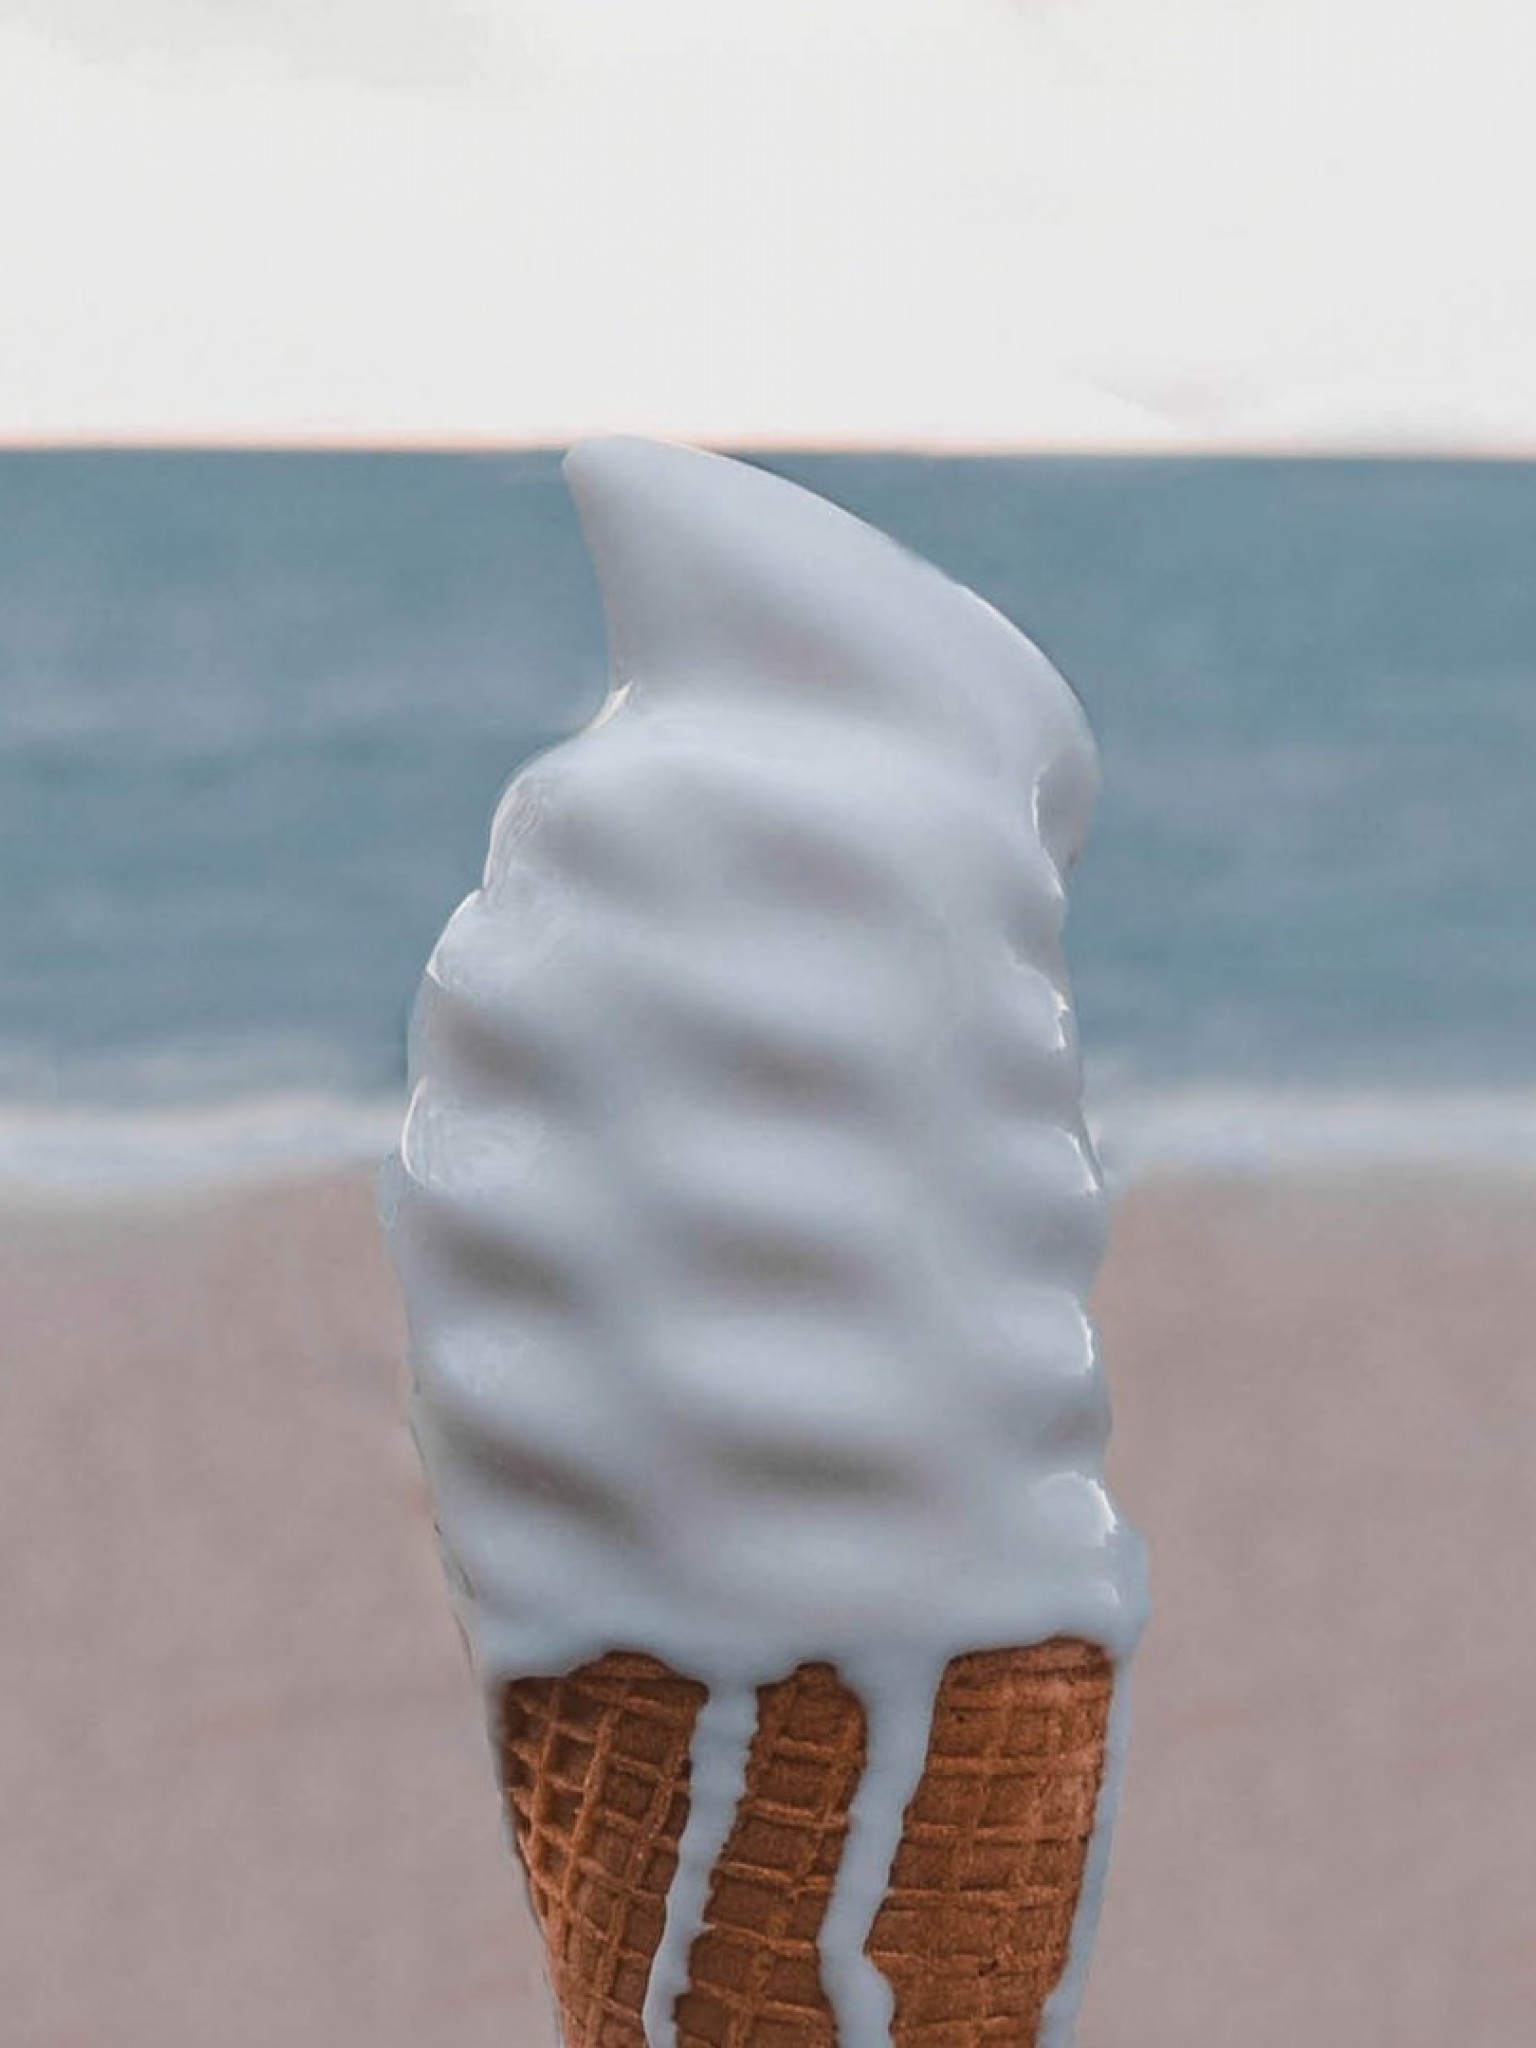 Melted ice cream HD Wallpaper